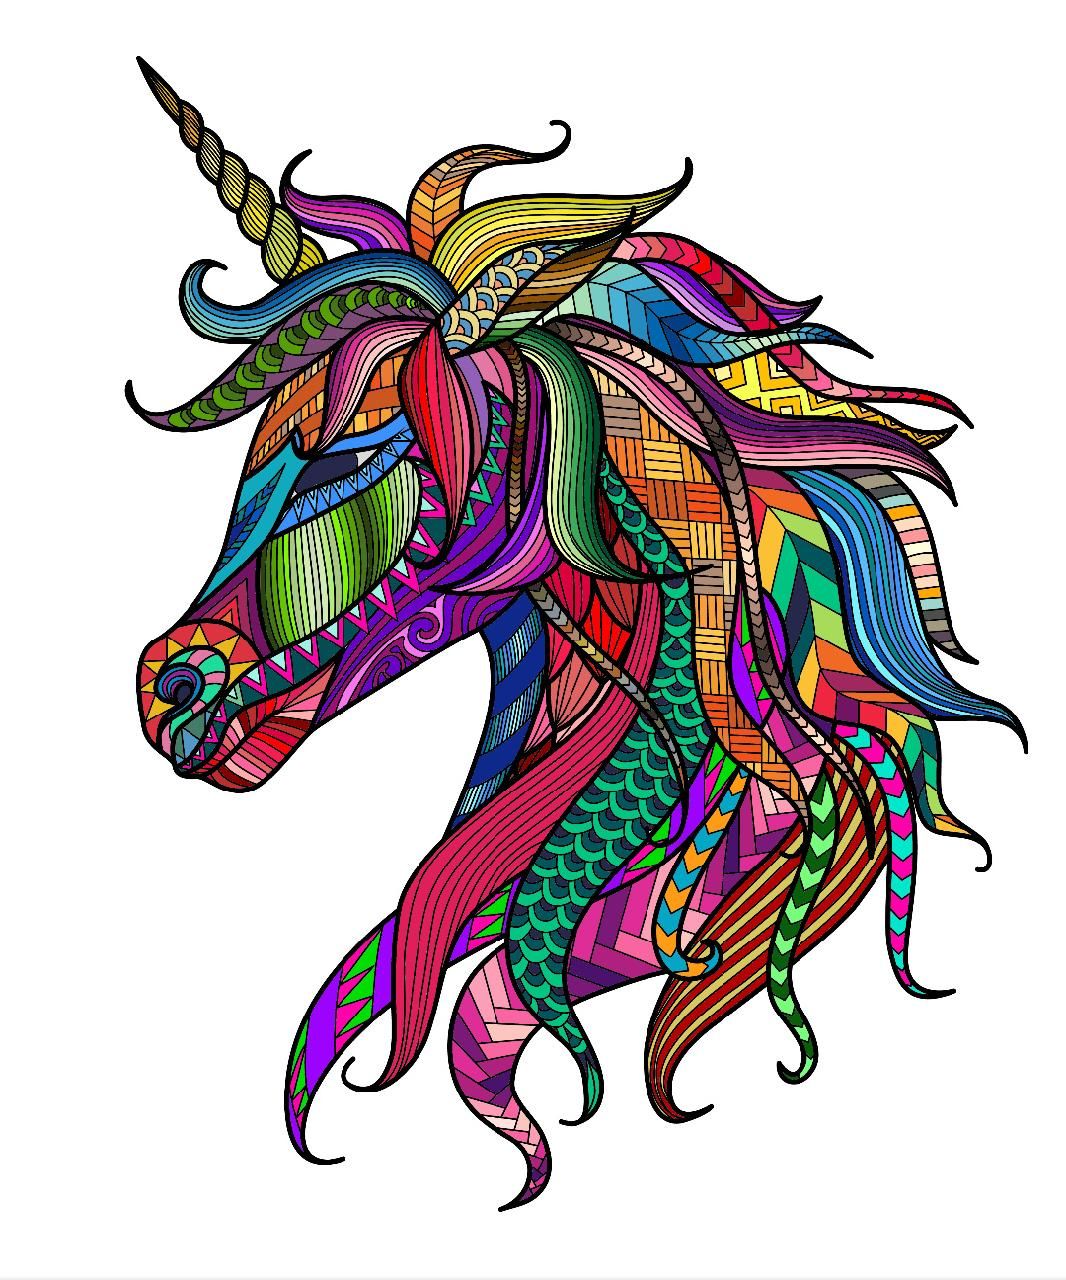 Download Rainbow Horse Wallpaper by kim13284 now. Browse millions of popular colo. Horse wallpaper, Amazing art painting, Mandala design art